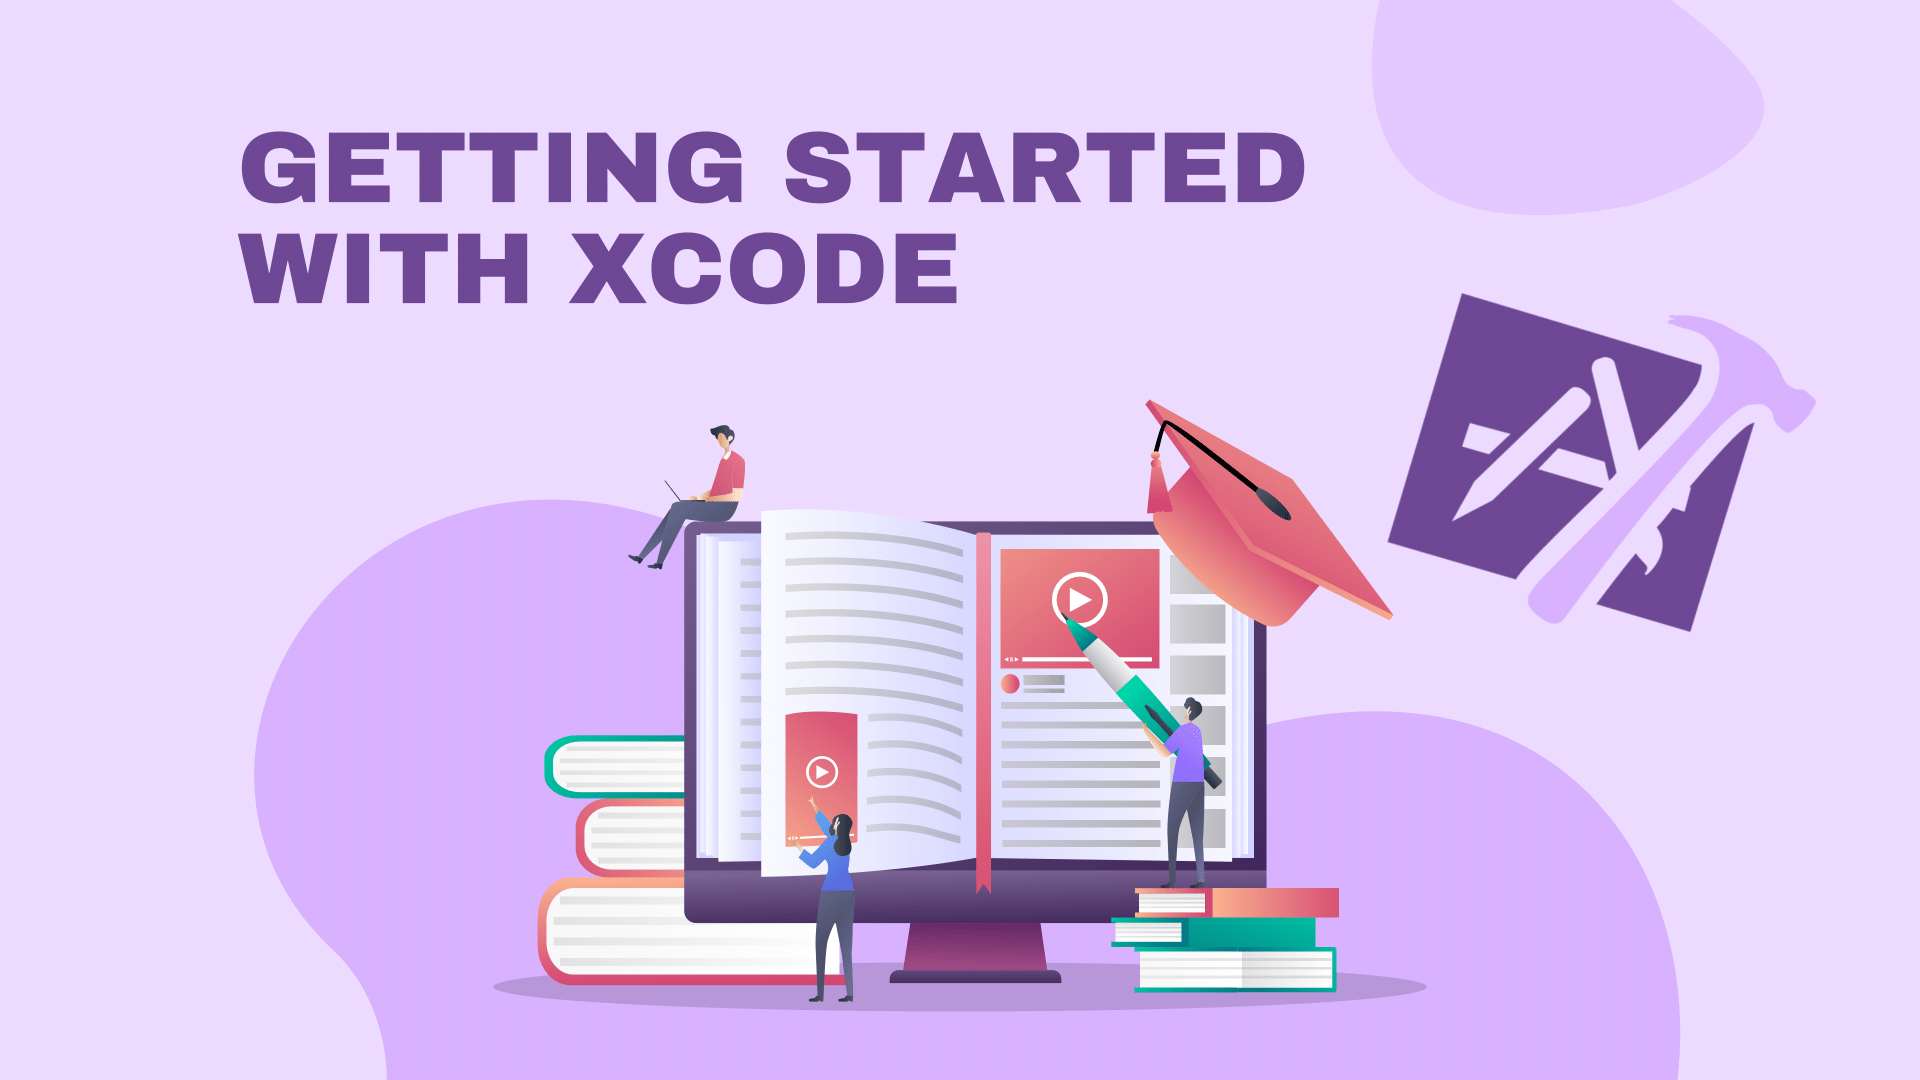 Getting Started With Xcode